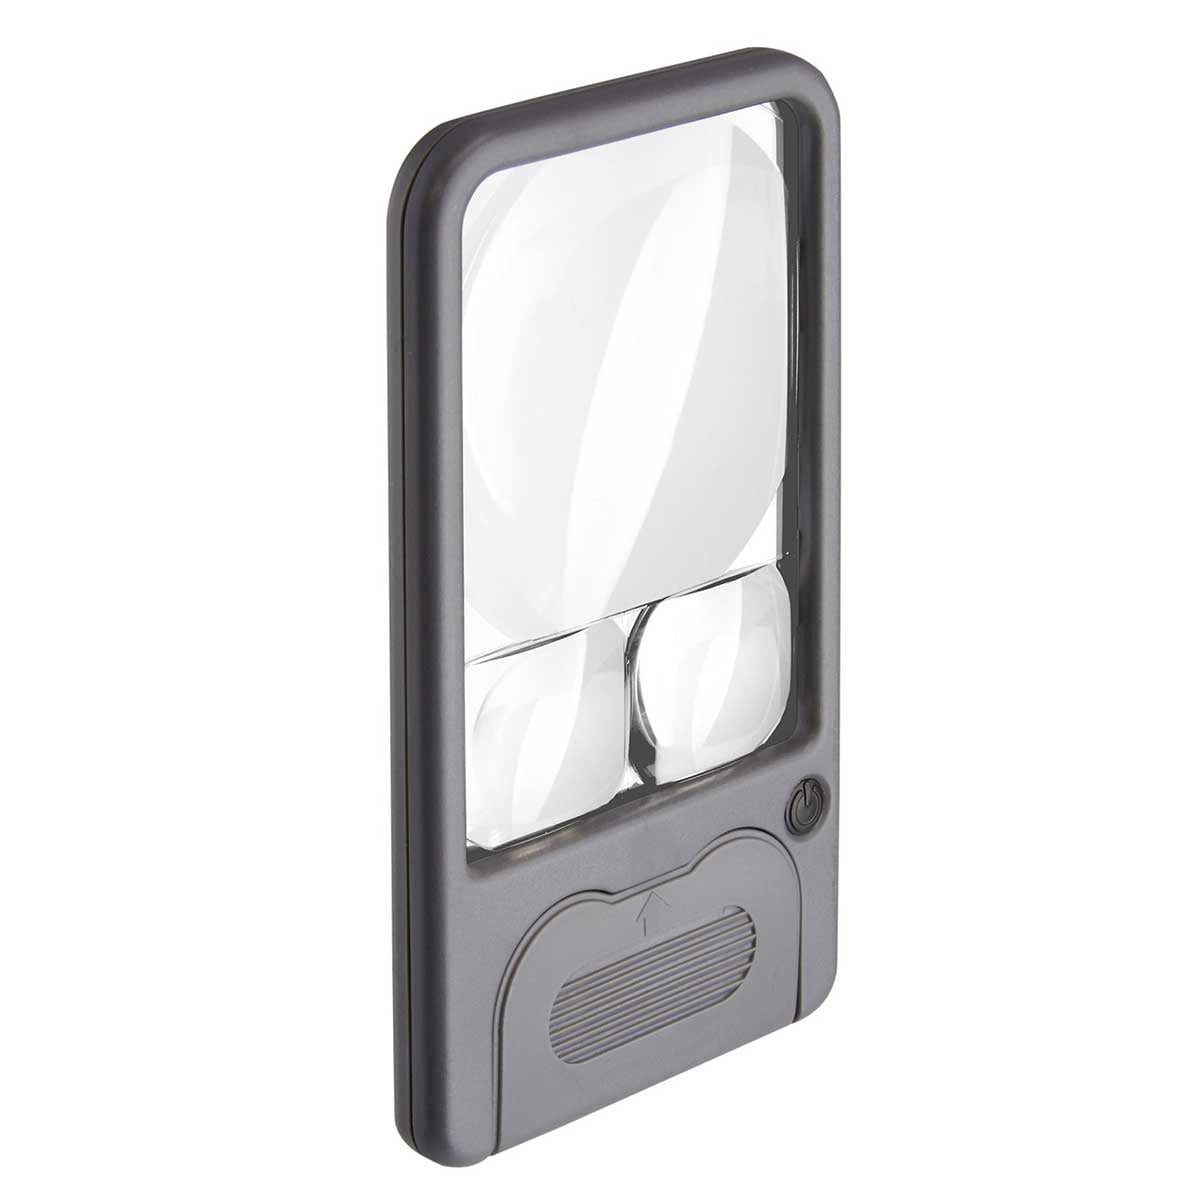 Lupa Carson Multi-Power LED Lighted Pocket Magnifier 2,5x / 4,5x / 6x